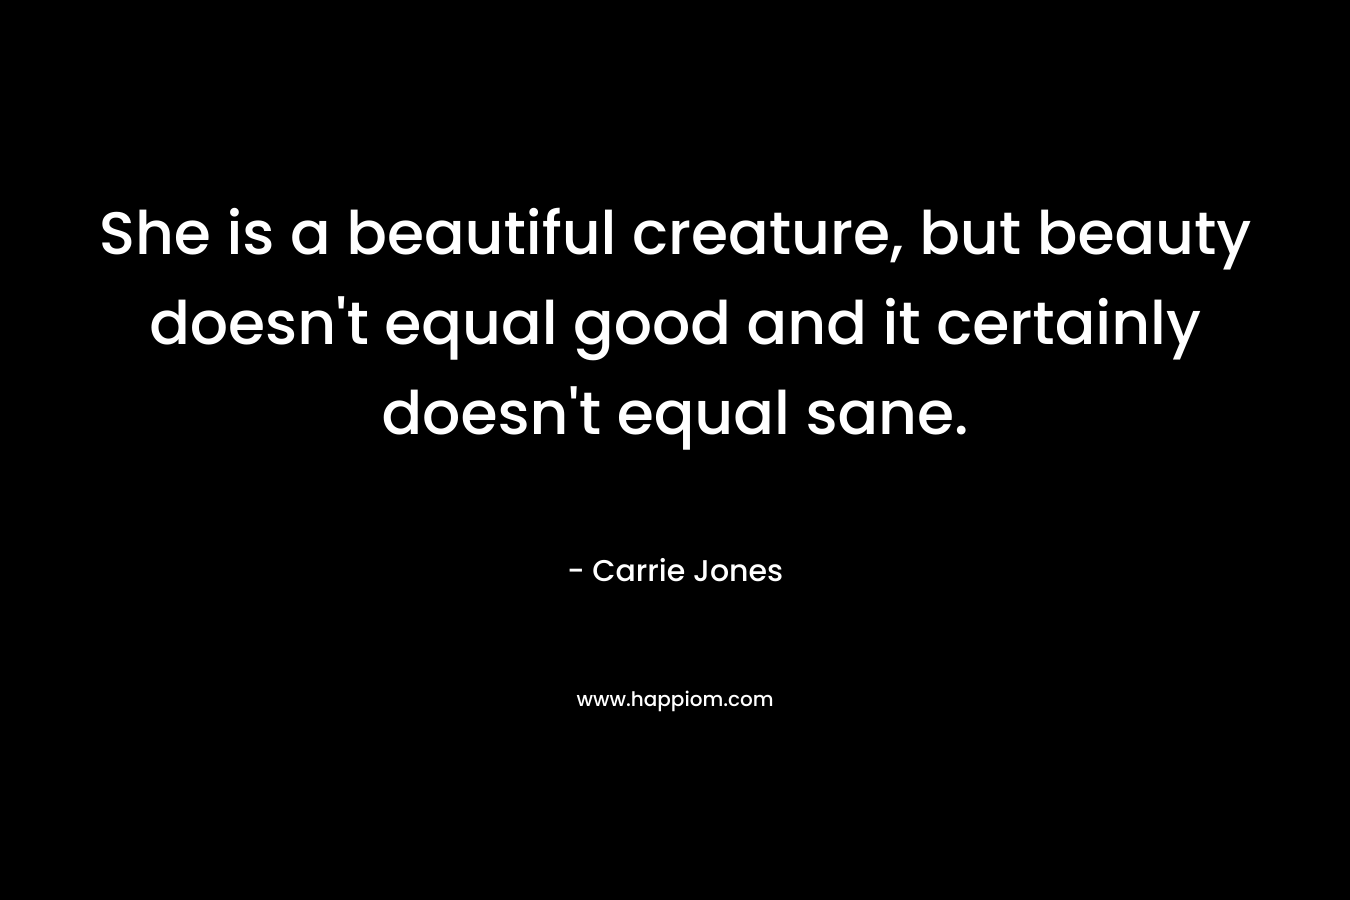 She is a beautiful creature, but beauty doesn’t equal good and it certainly doesn’t equal sane. – Carrie Jones